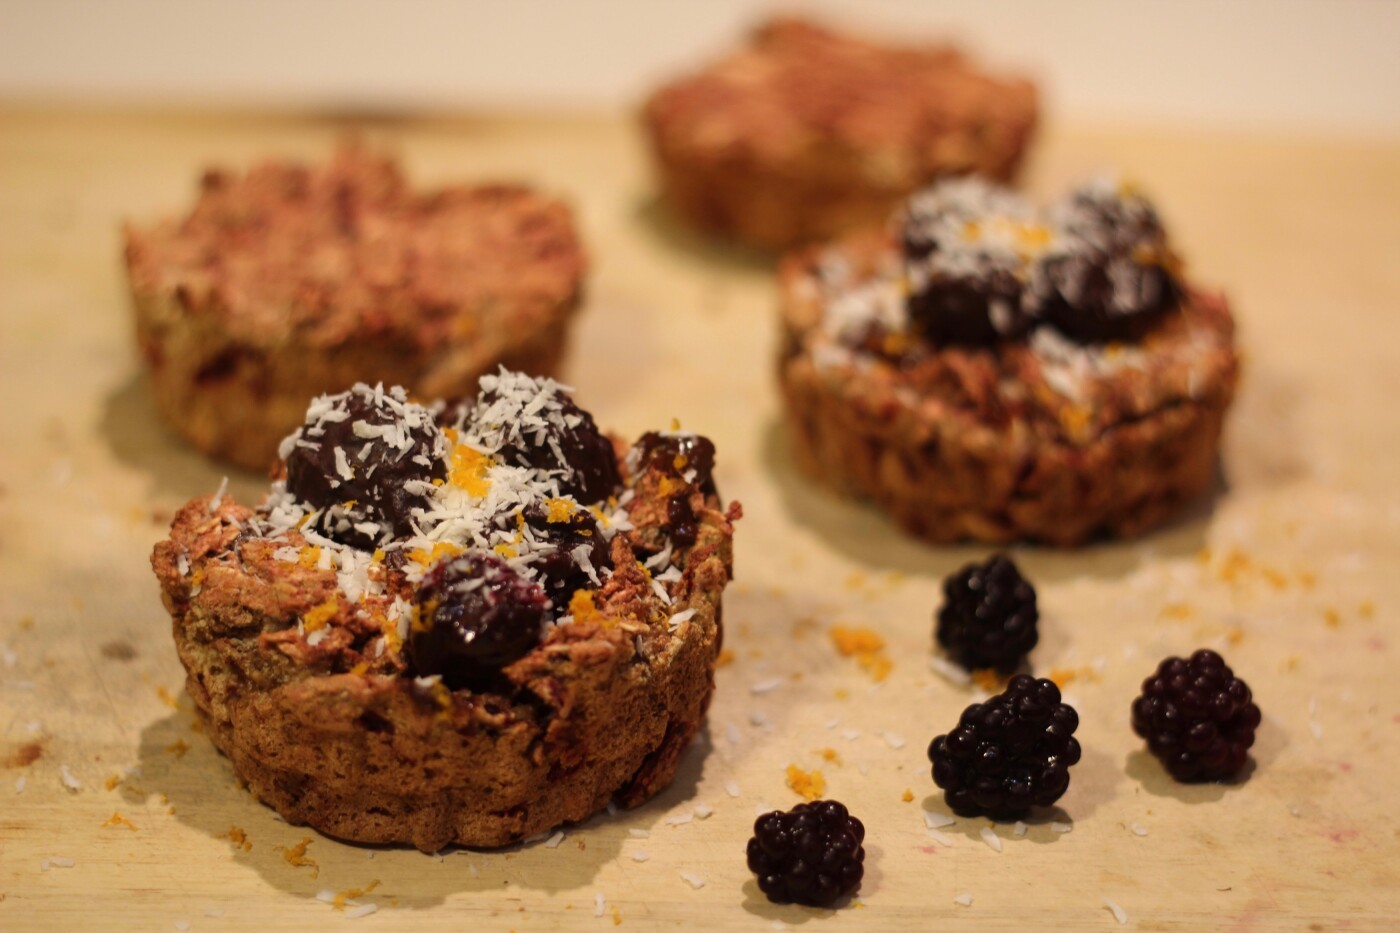 I wanted to create a delicious and fibrous dessert. I did not use any sugar or artificial flavoring but rather dates, blackberries and dark chocolate to sweeten, coconut and orange zest to finish.<br />
The muffins themselves contain flax, beets, bee pollen and coconut flour. They are sustaining, delicious and a treat whilst maintaining a complete nutritional profile!  